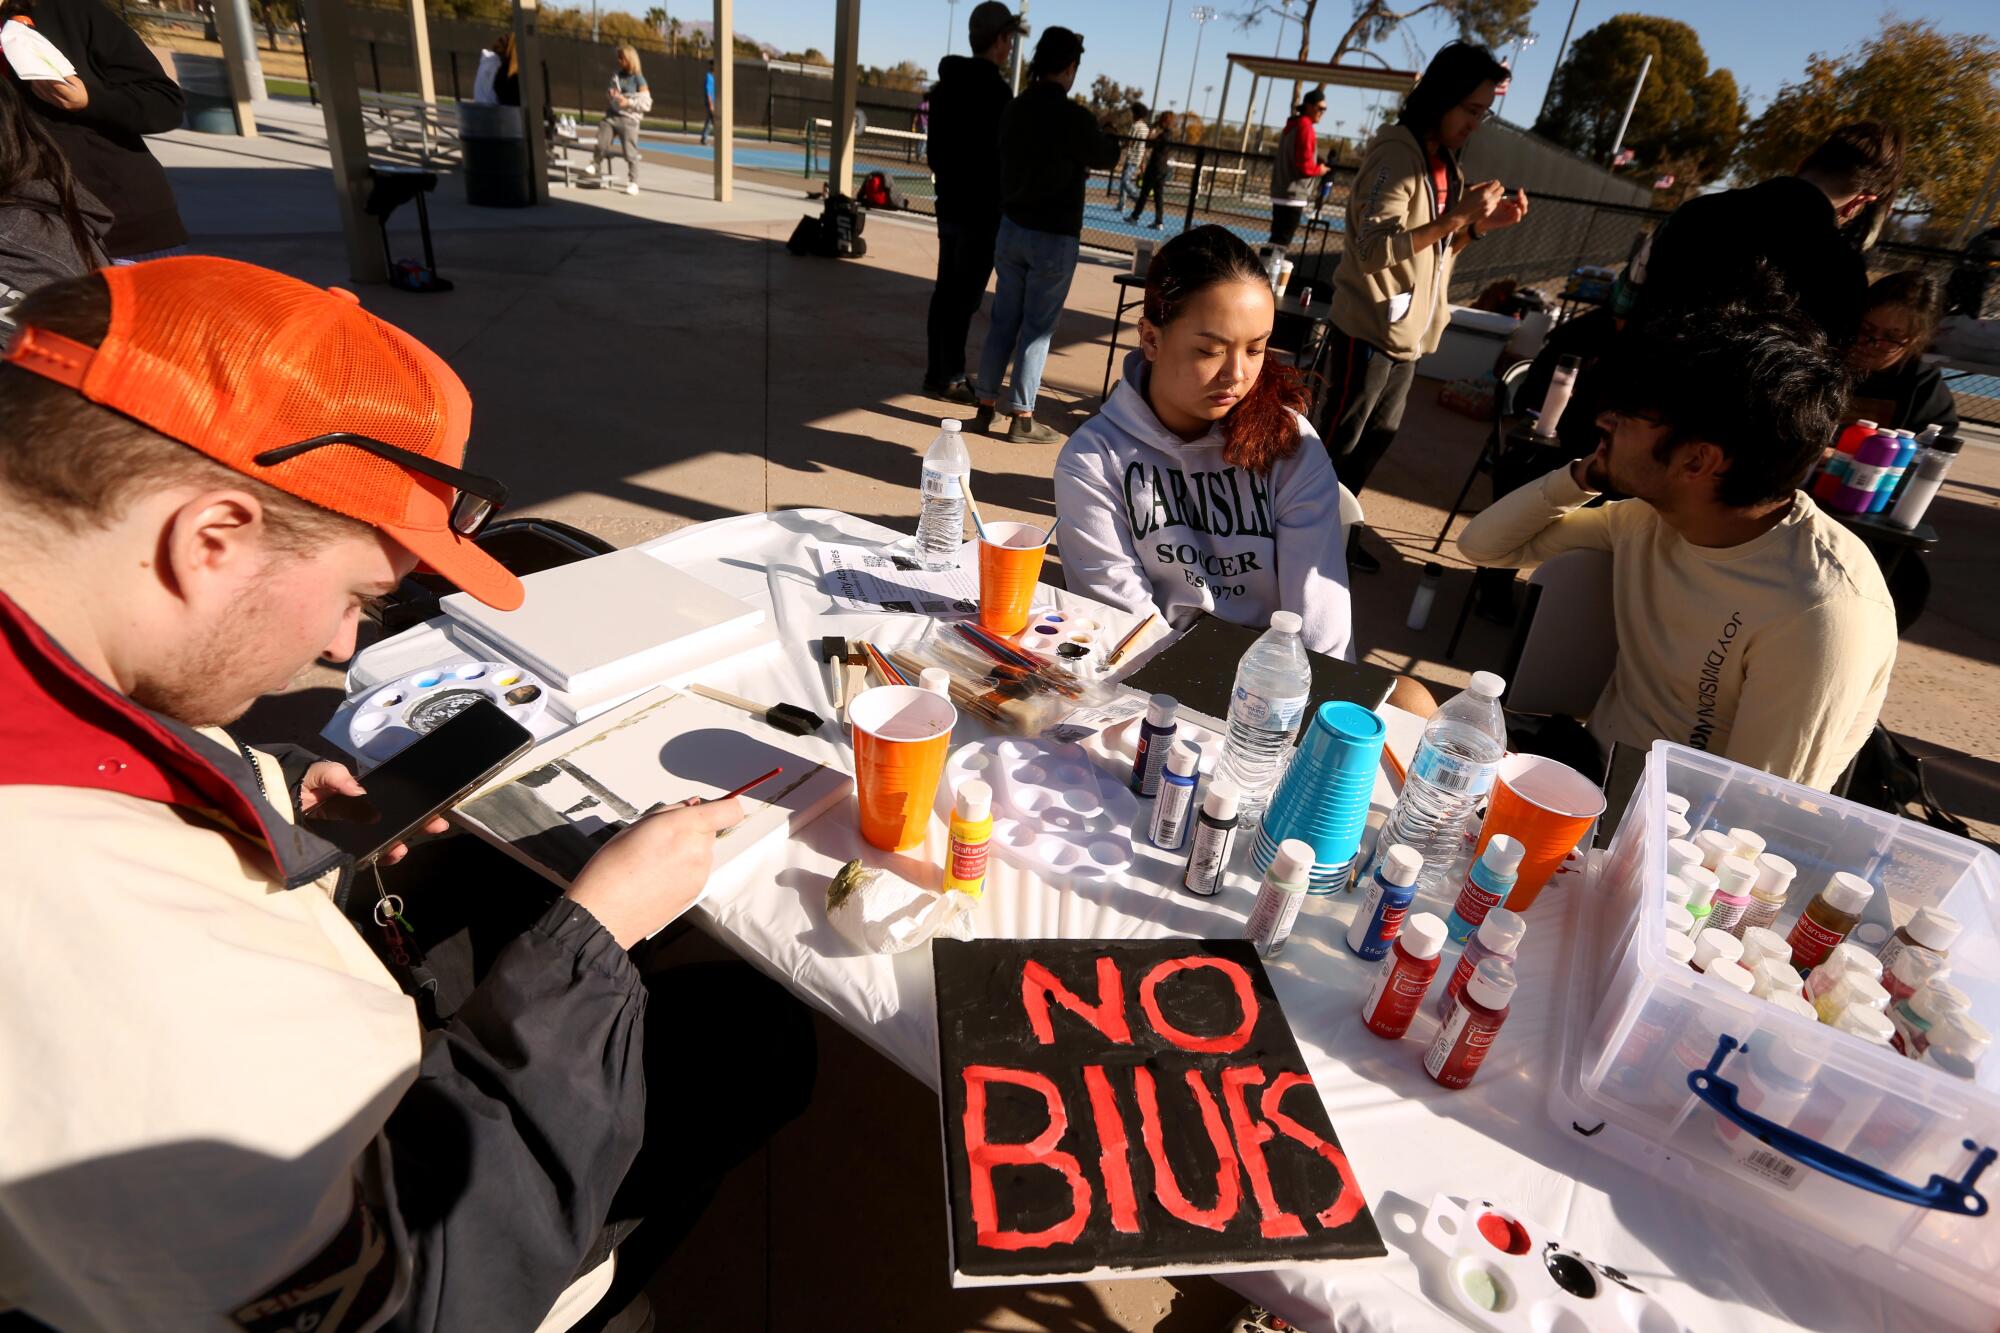 UNLV student Mina Hickey, 19, center, and other students paint to avoid 